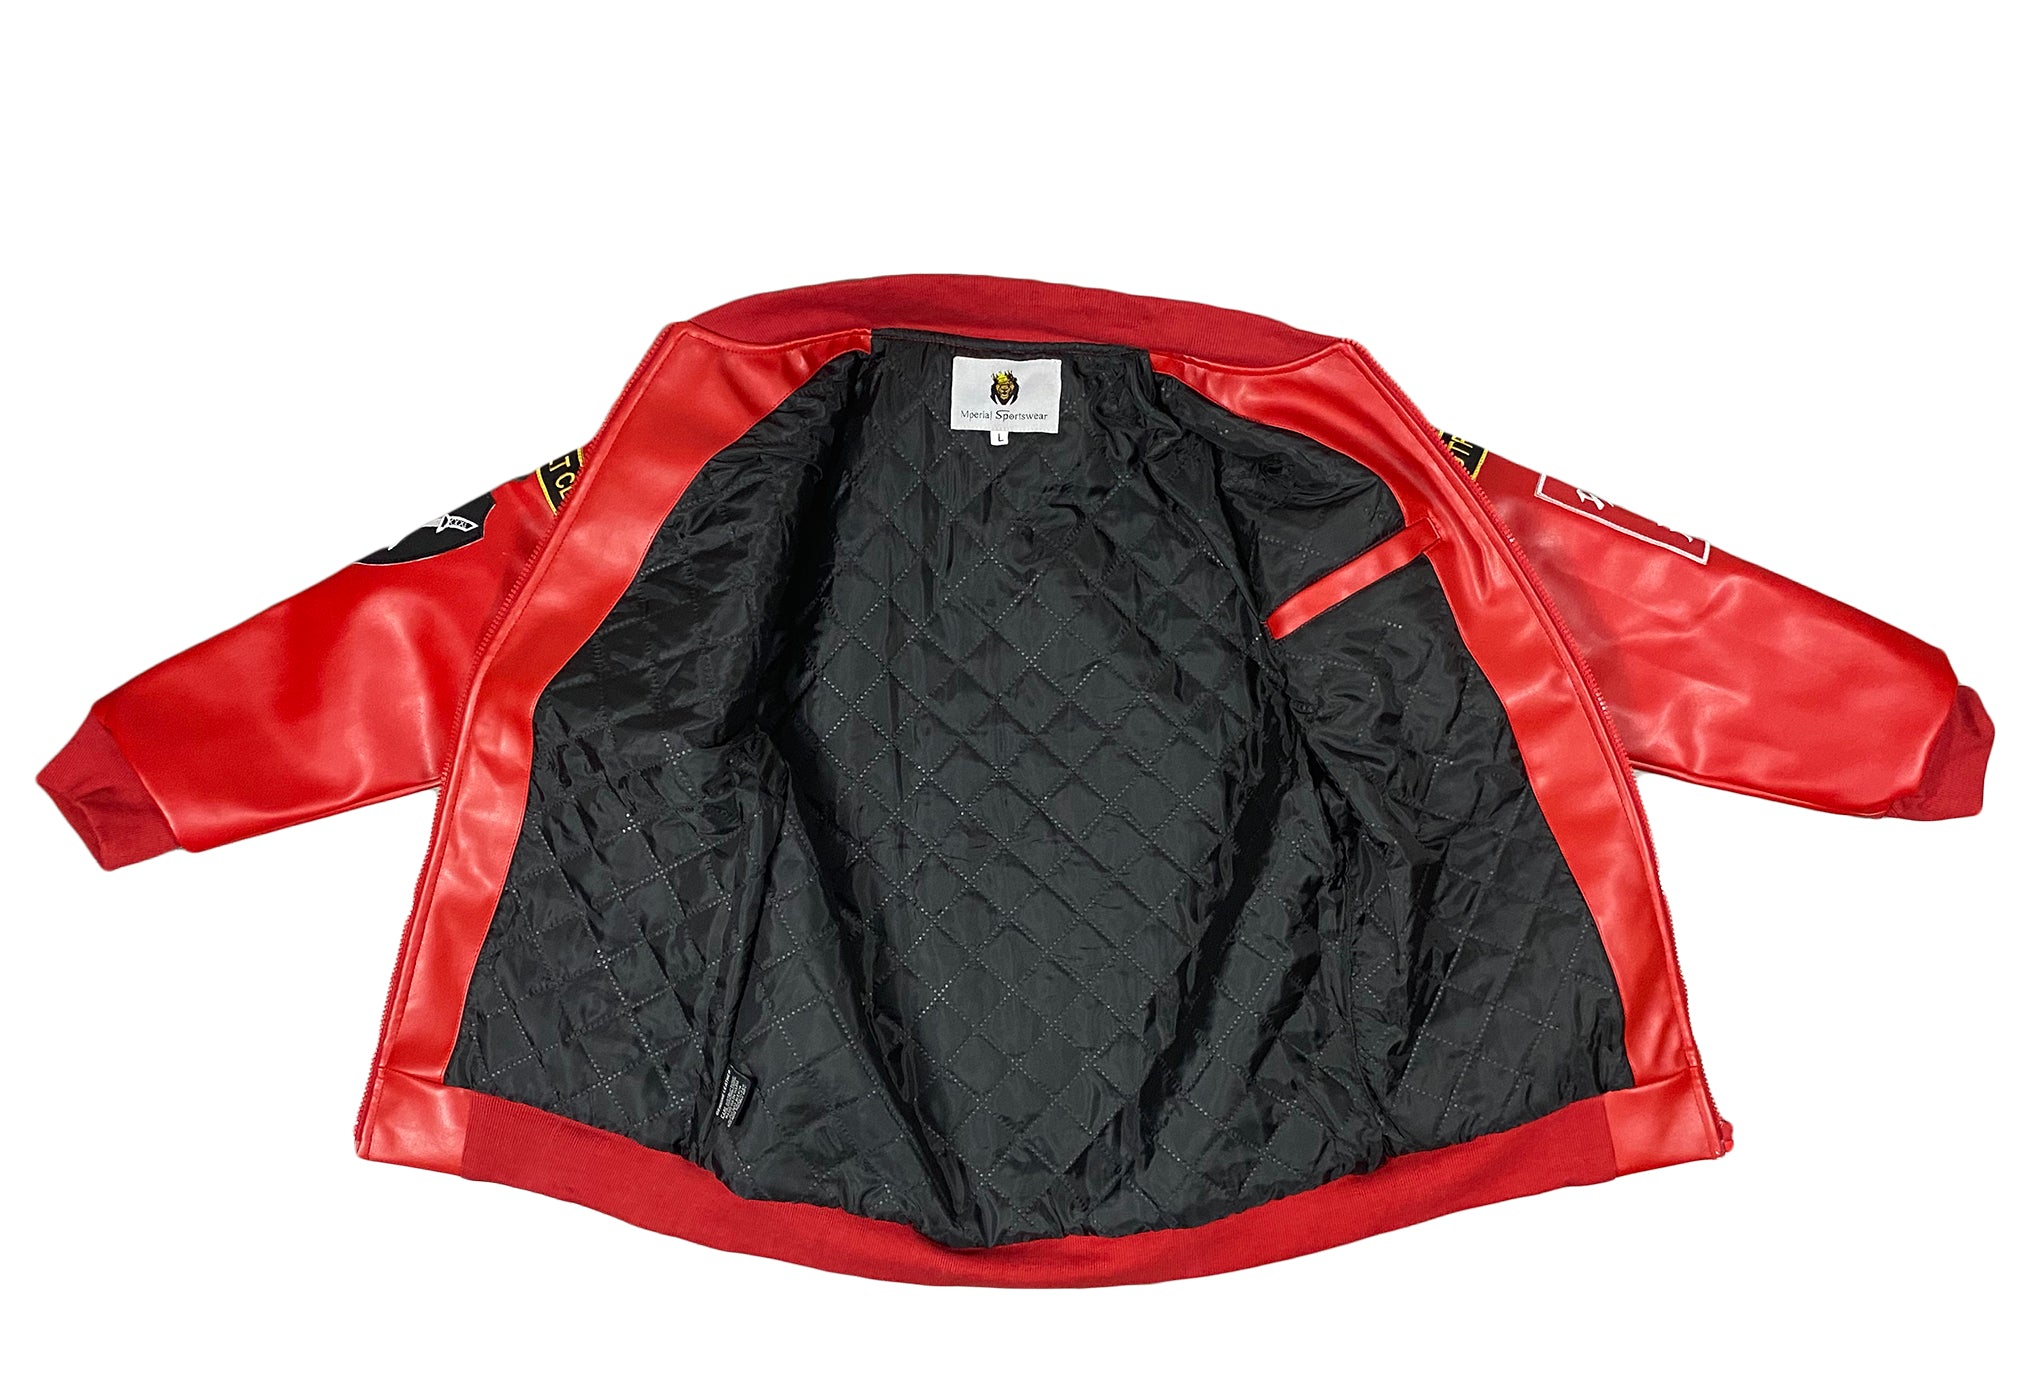 Dragon Fly Jones Leather Bomber and Face Mask